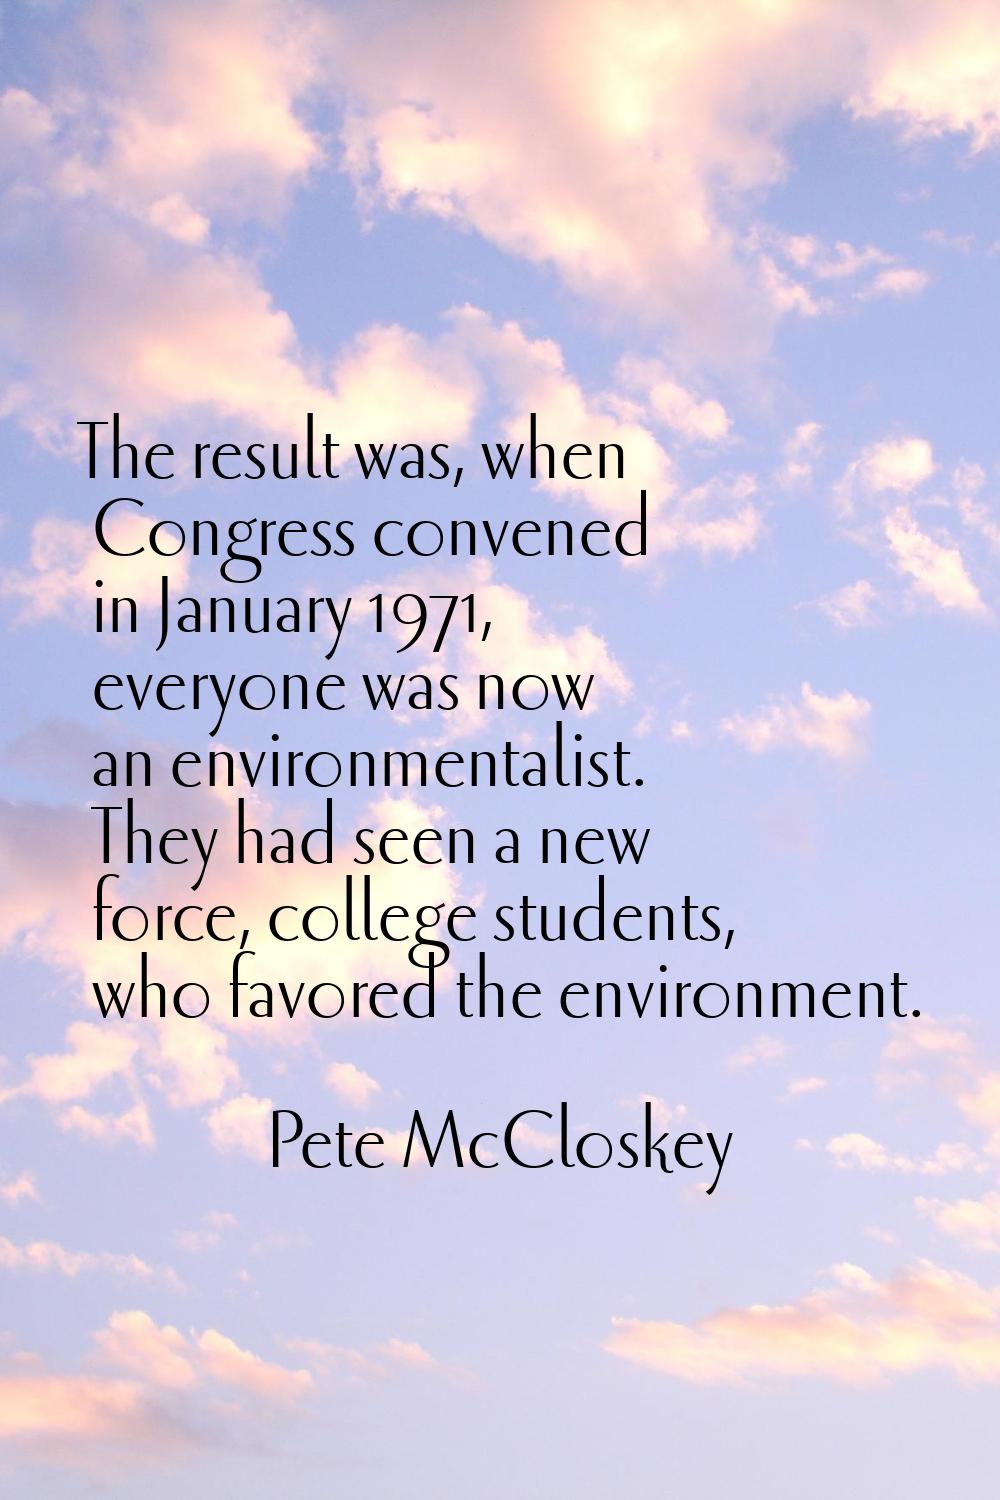 The result was, when Congress convened in January 1971, everyone was now an environmentalist. They 